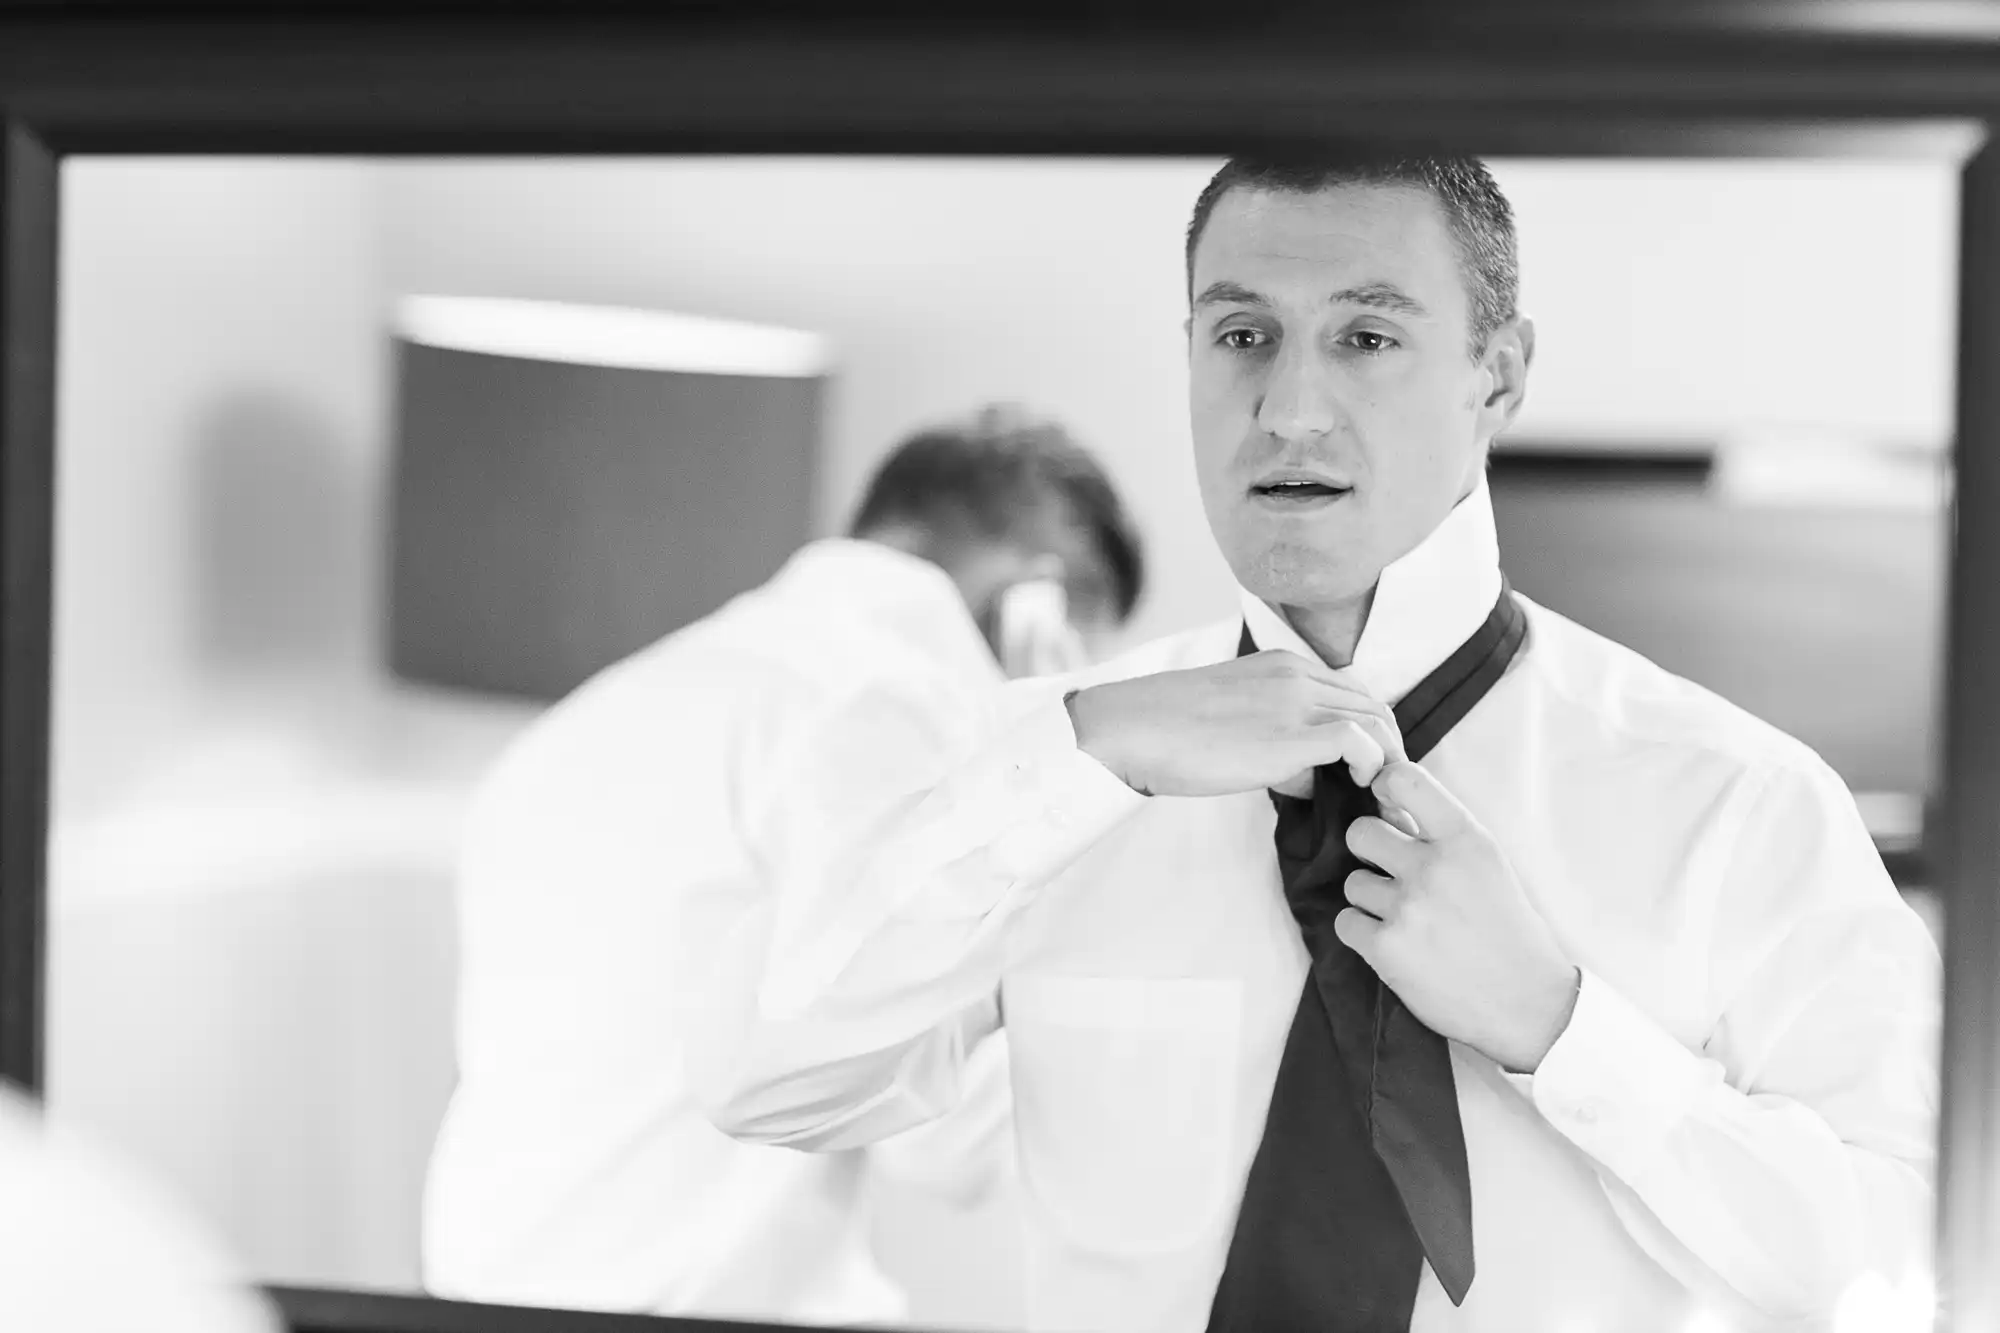 Man in a white shirt adjusts his black tie while looking at his reflection in a mirror, depicted in a black and white photograph.